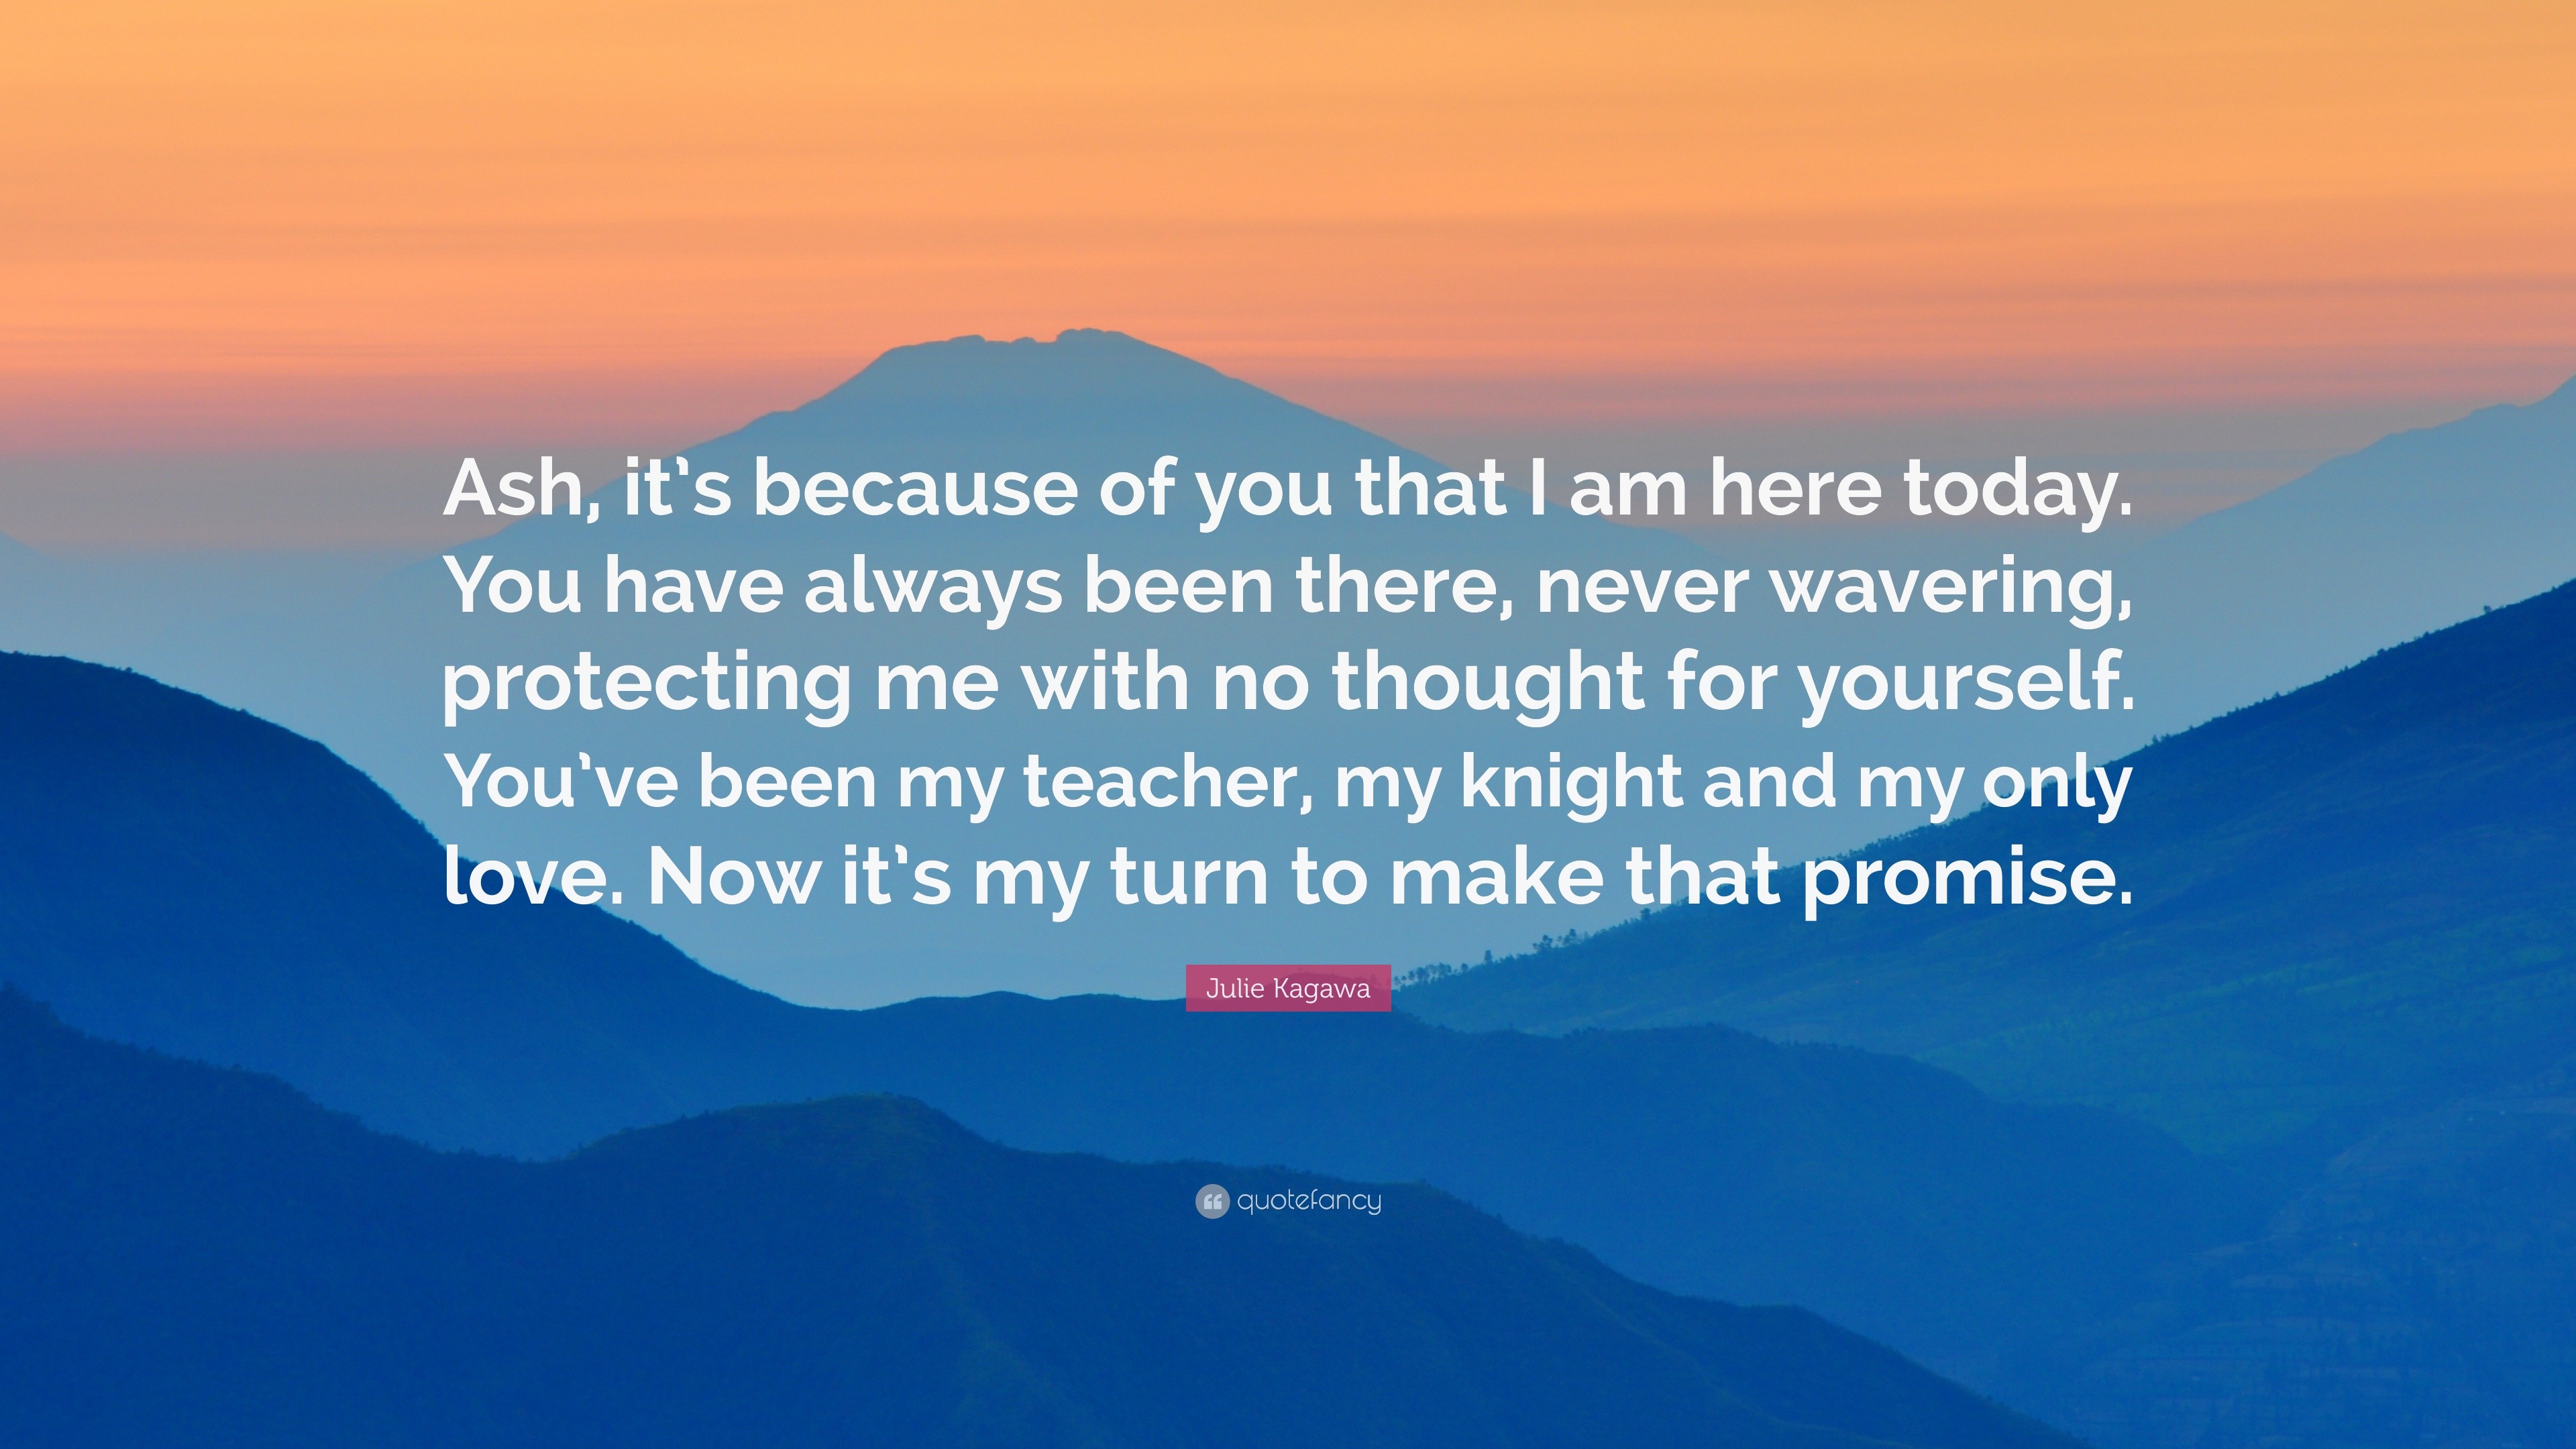 Julie Kagawa Quote: “Ash, It's Because Of You That I Am Here Today. You Have Always Been There, Never Wavering, Protecting Me With No Thought...”